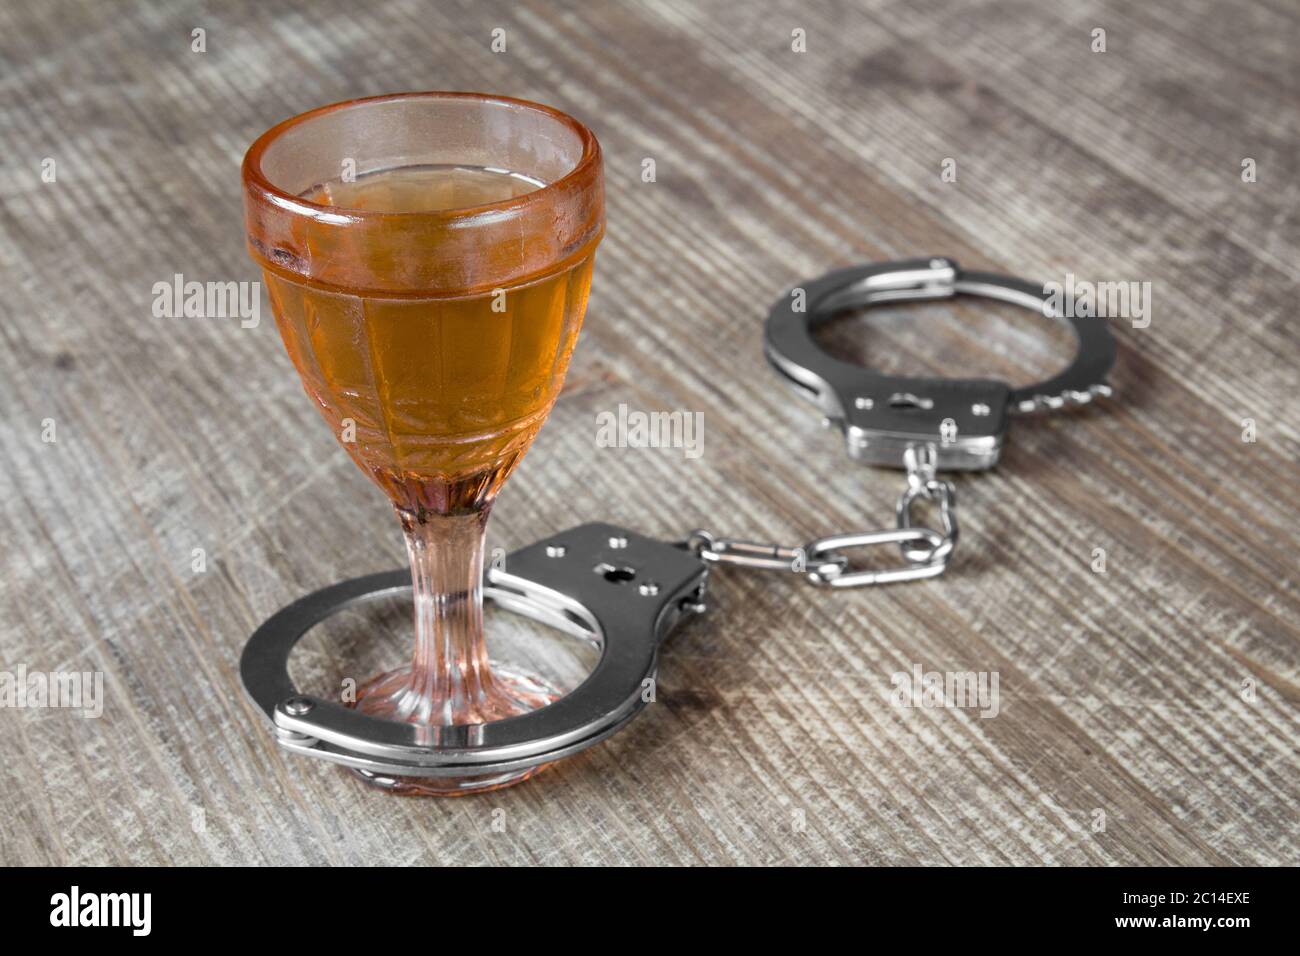 Alcohol abuse concept Stock Photo